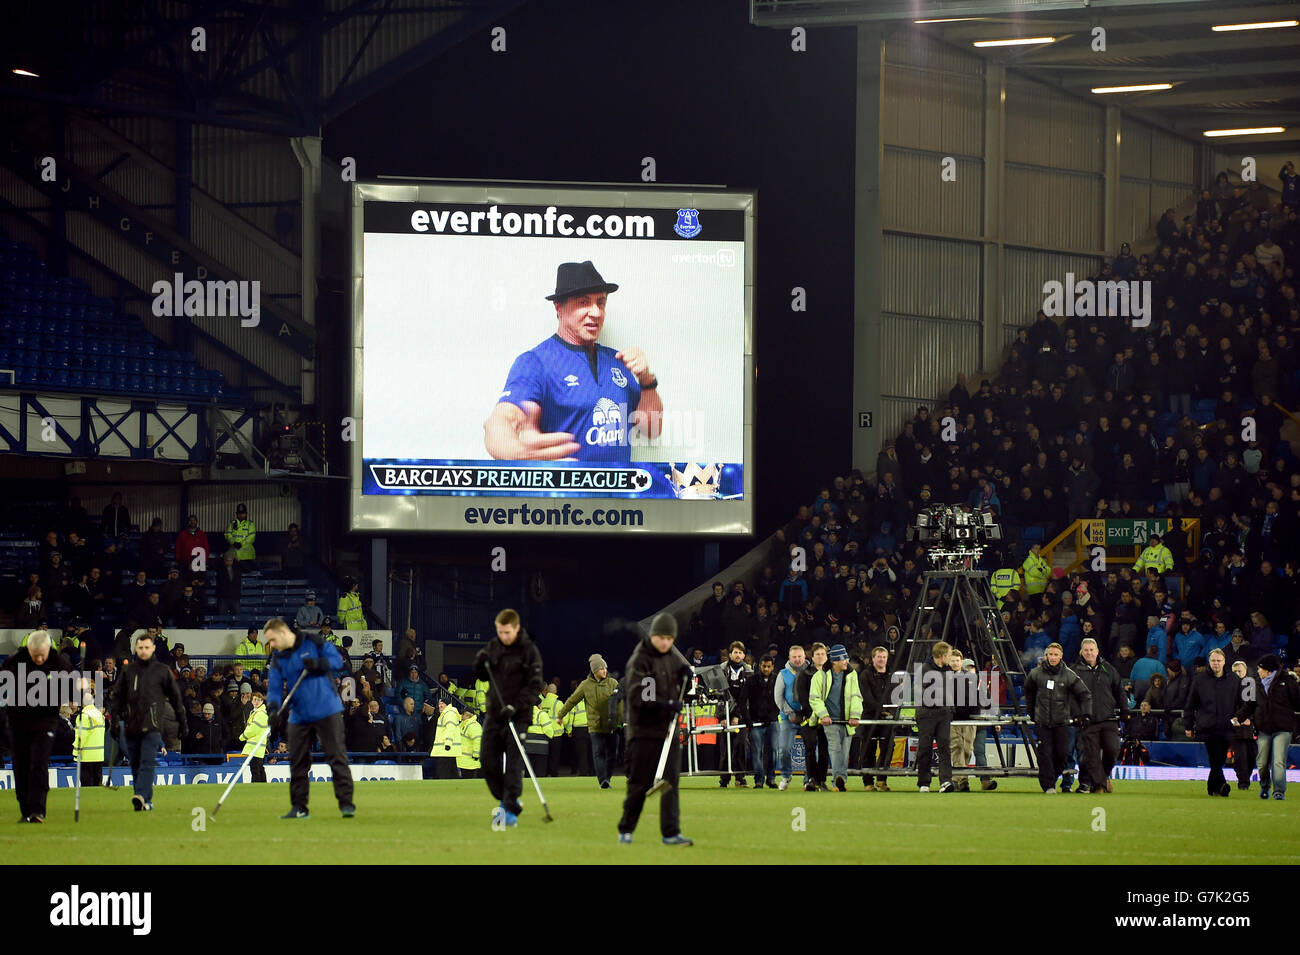 Soccer - Barclays Premier League - Everton v West Bromwich Albion - Goodison Park. Everton fan Sylvester Stallone on the giant screen at Goodison Park Stock Photo